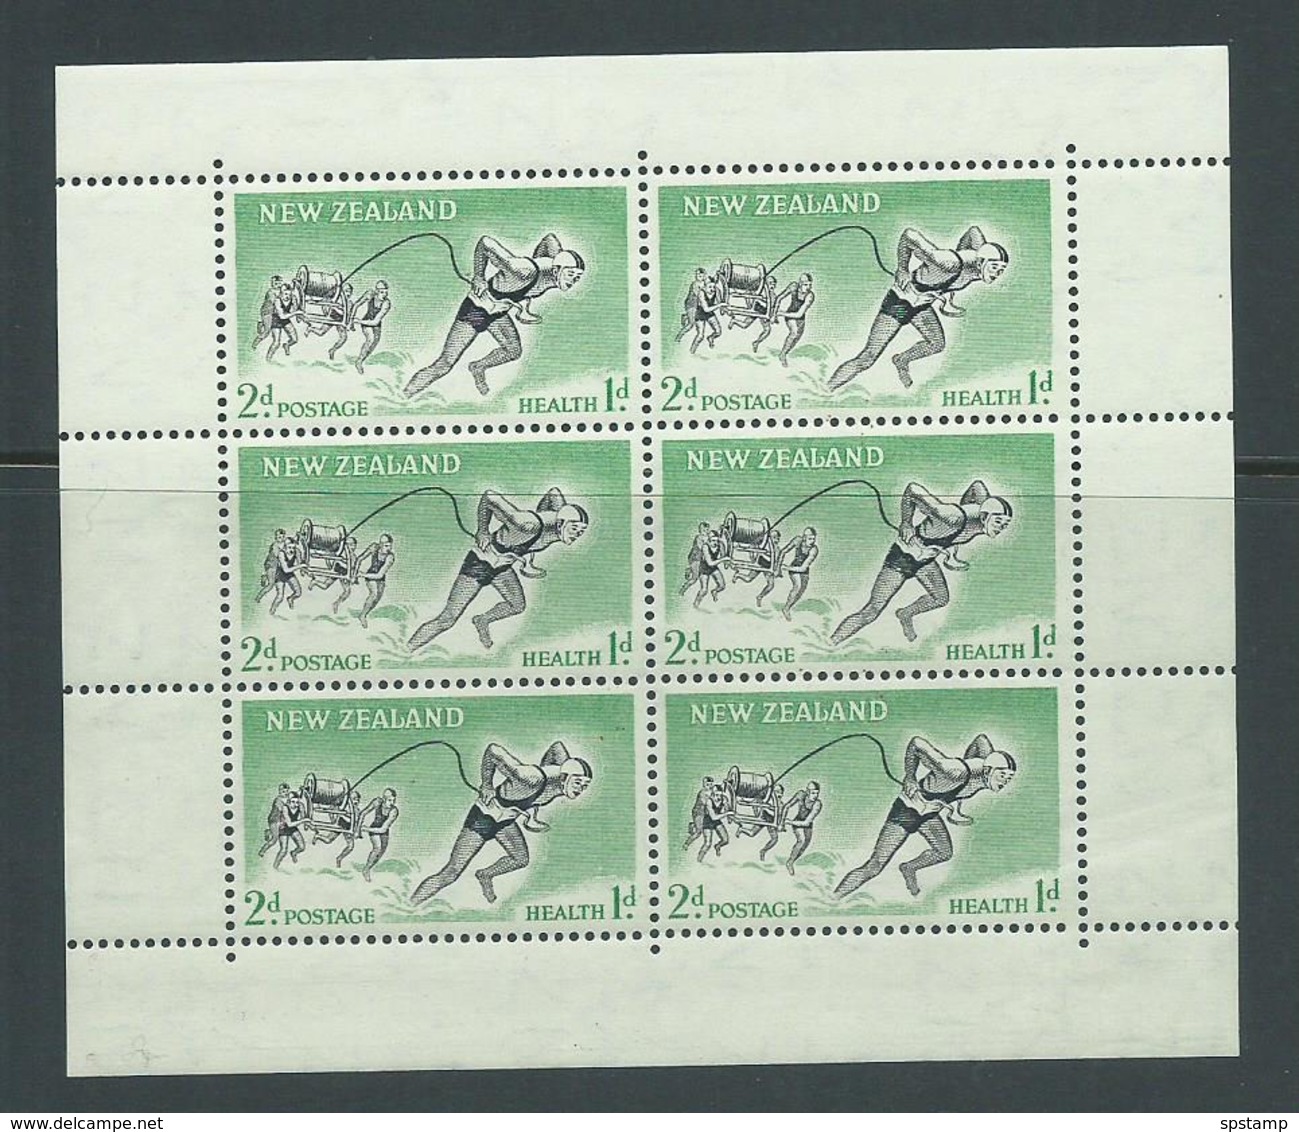 New Zealand 1957 2d + 1d Lifesaver Health Charity Miniature Sheets Sideways Watermark MNH - Unused Stamps